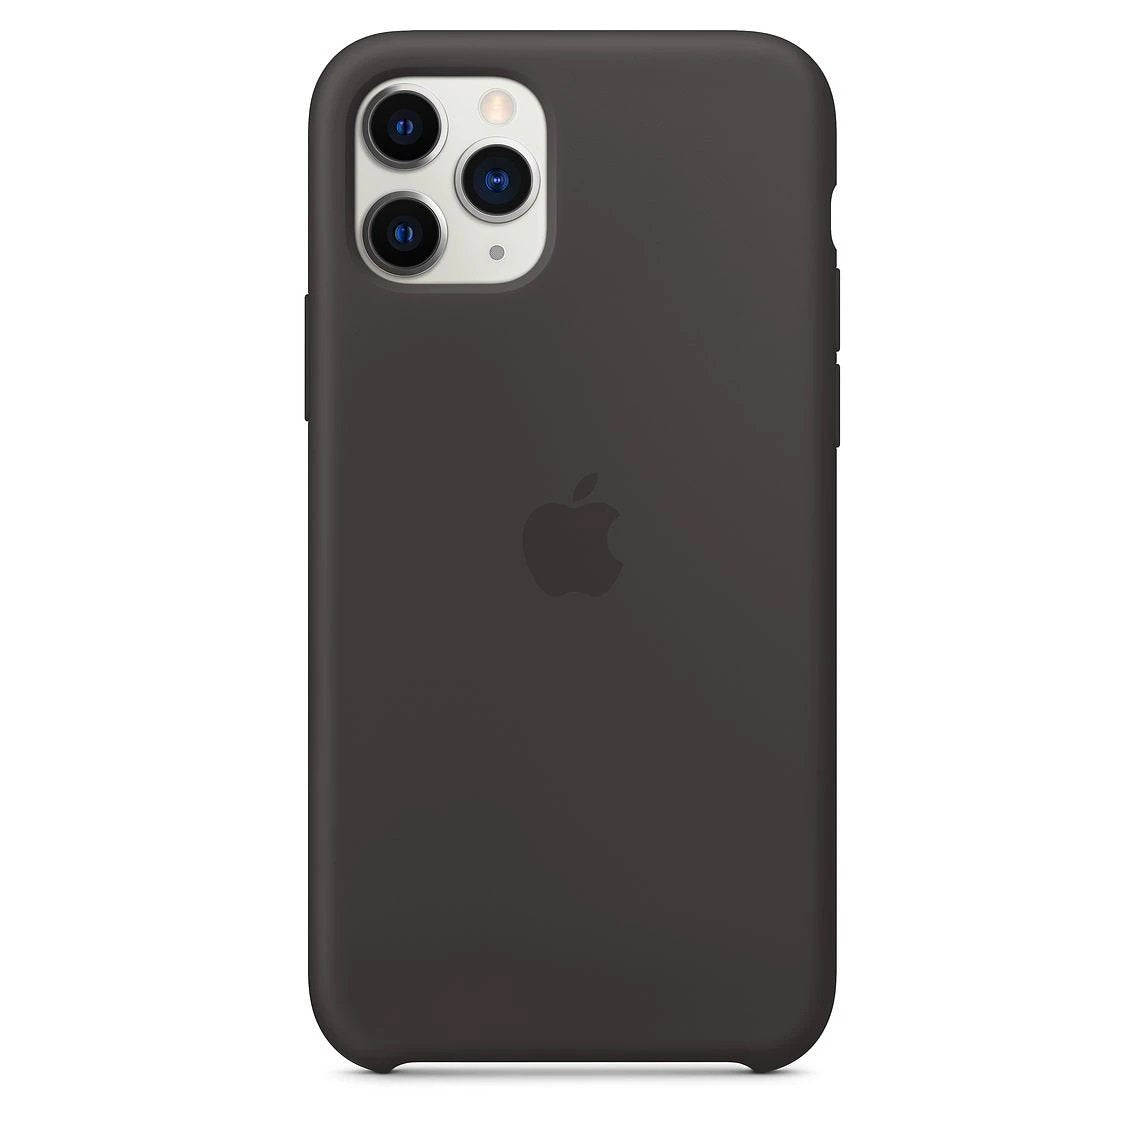 Silicon Case For iPhone 11 Pro - Black - Mobilegadgets360